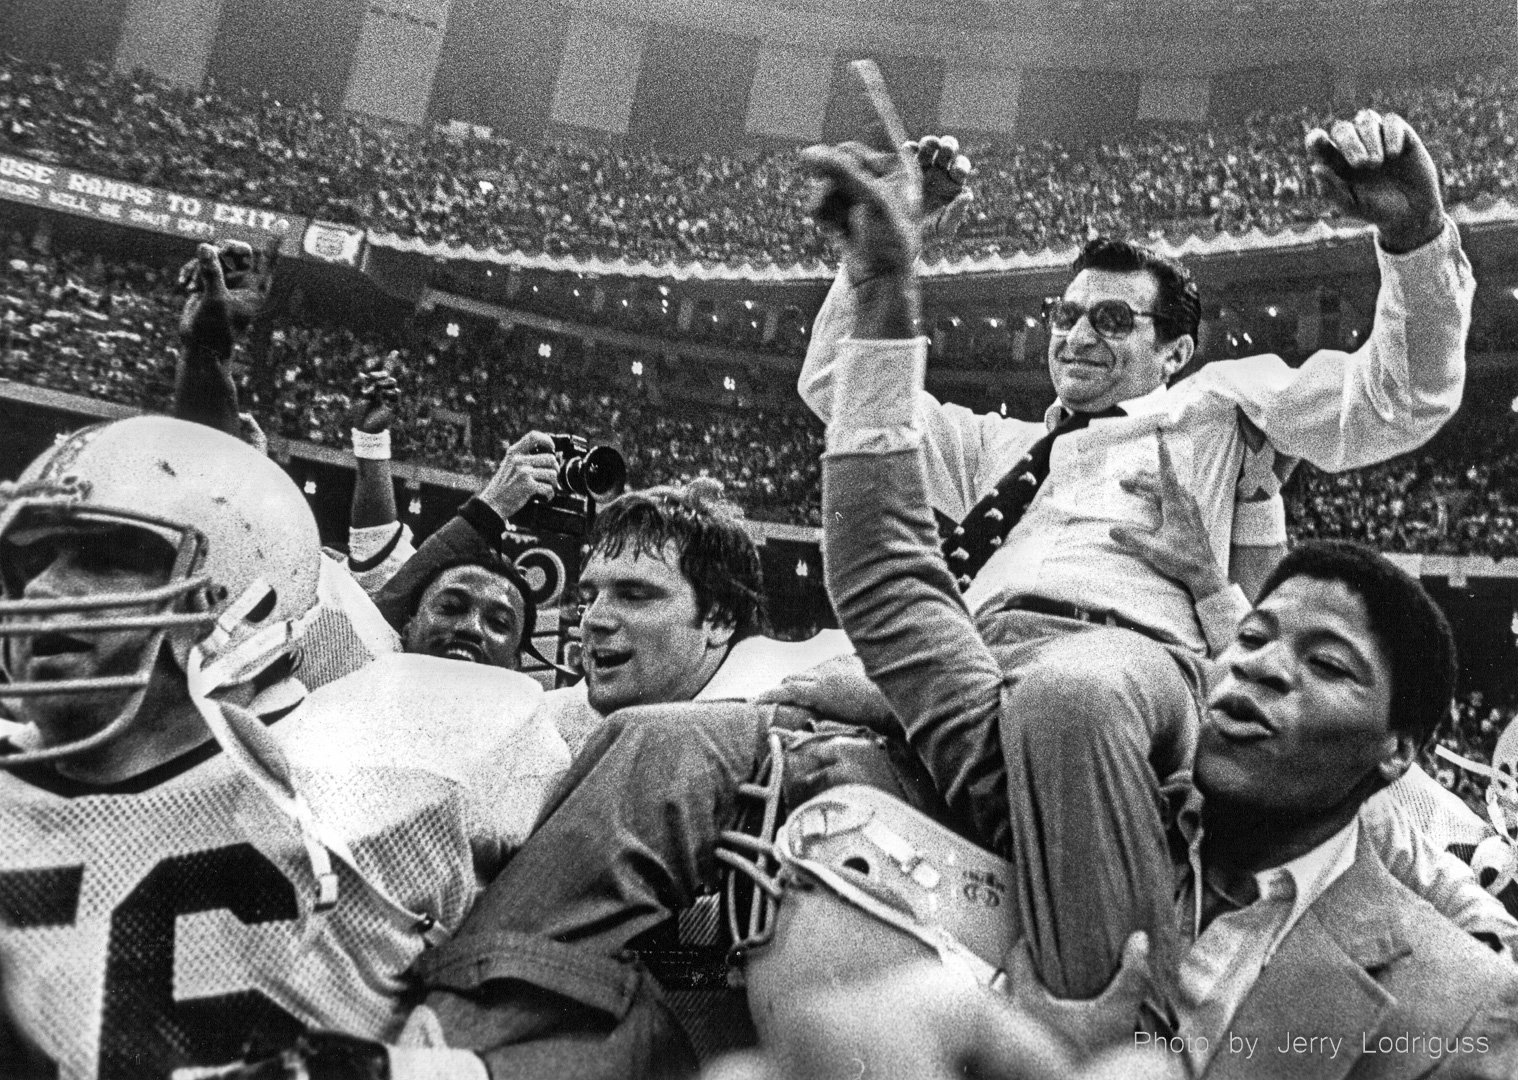 Penn State football coach Joe Paterno is carried off the field after the Nittany Lions defeated the Georgia Bulldogs 27-23 to claim the National Championship in the Sugar Bowl in New Orleans on January 1, 1983.